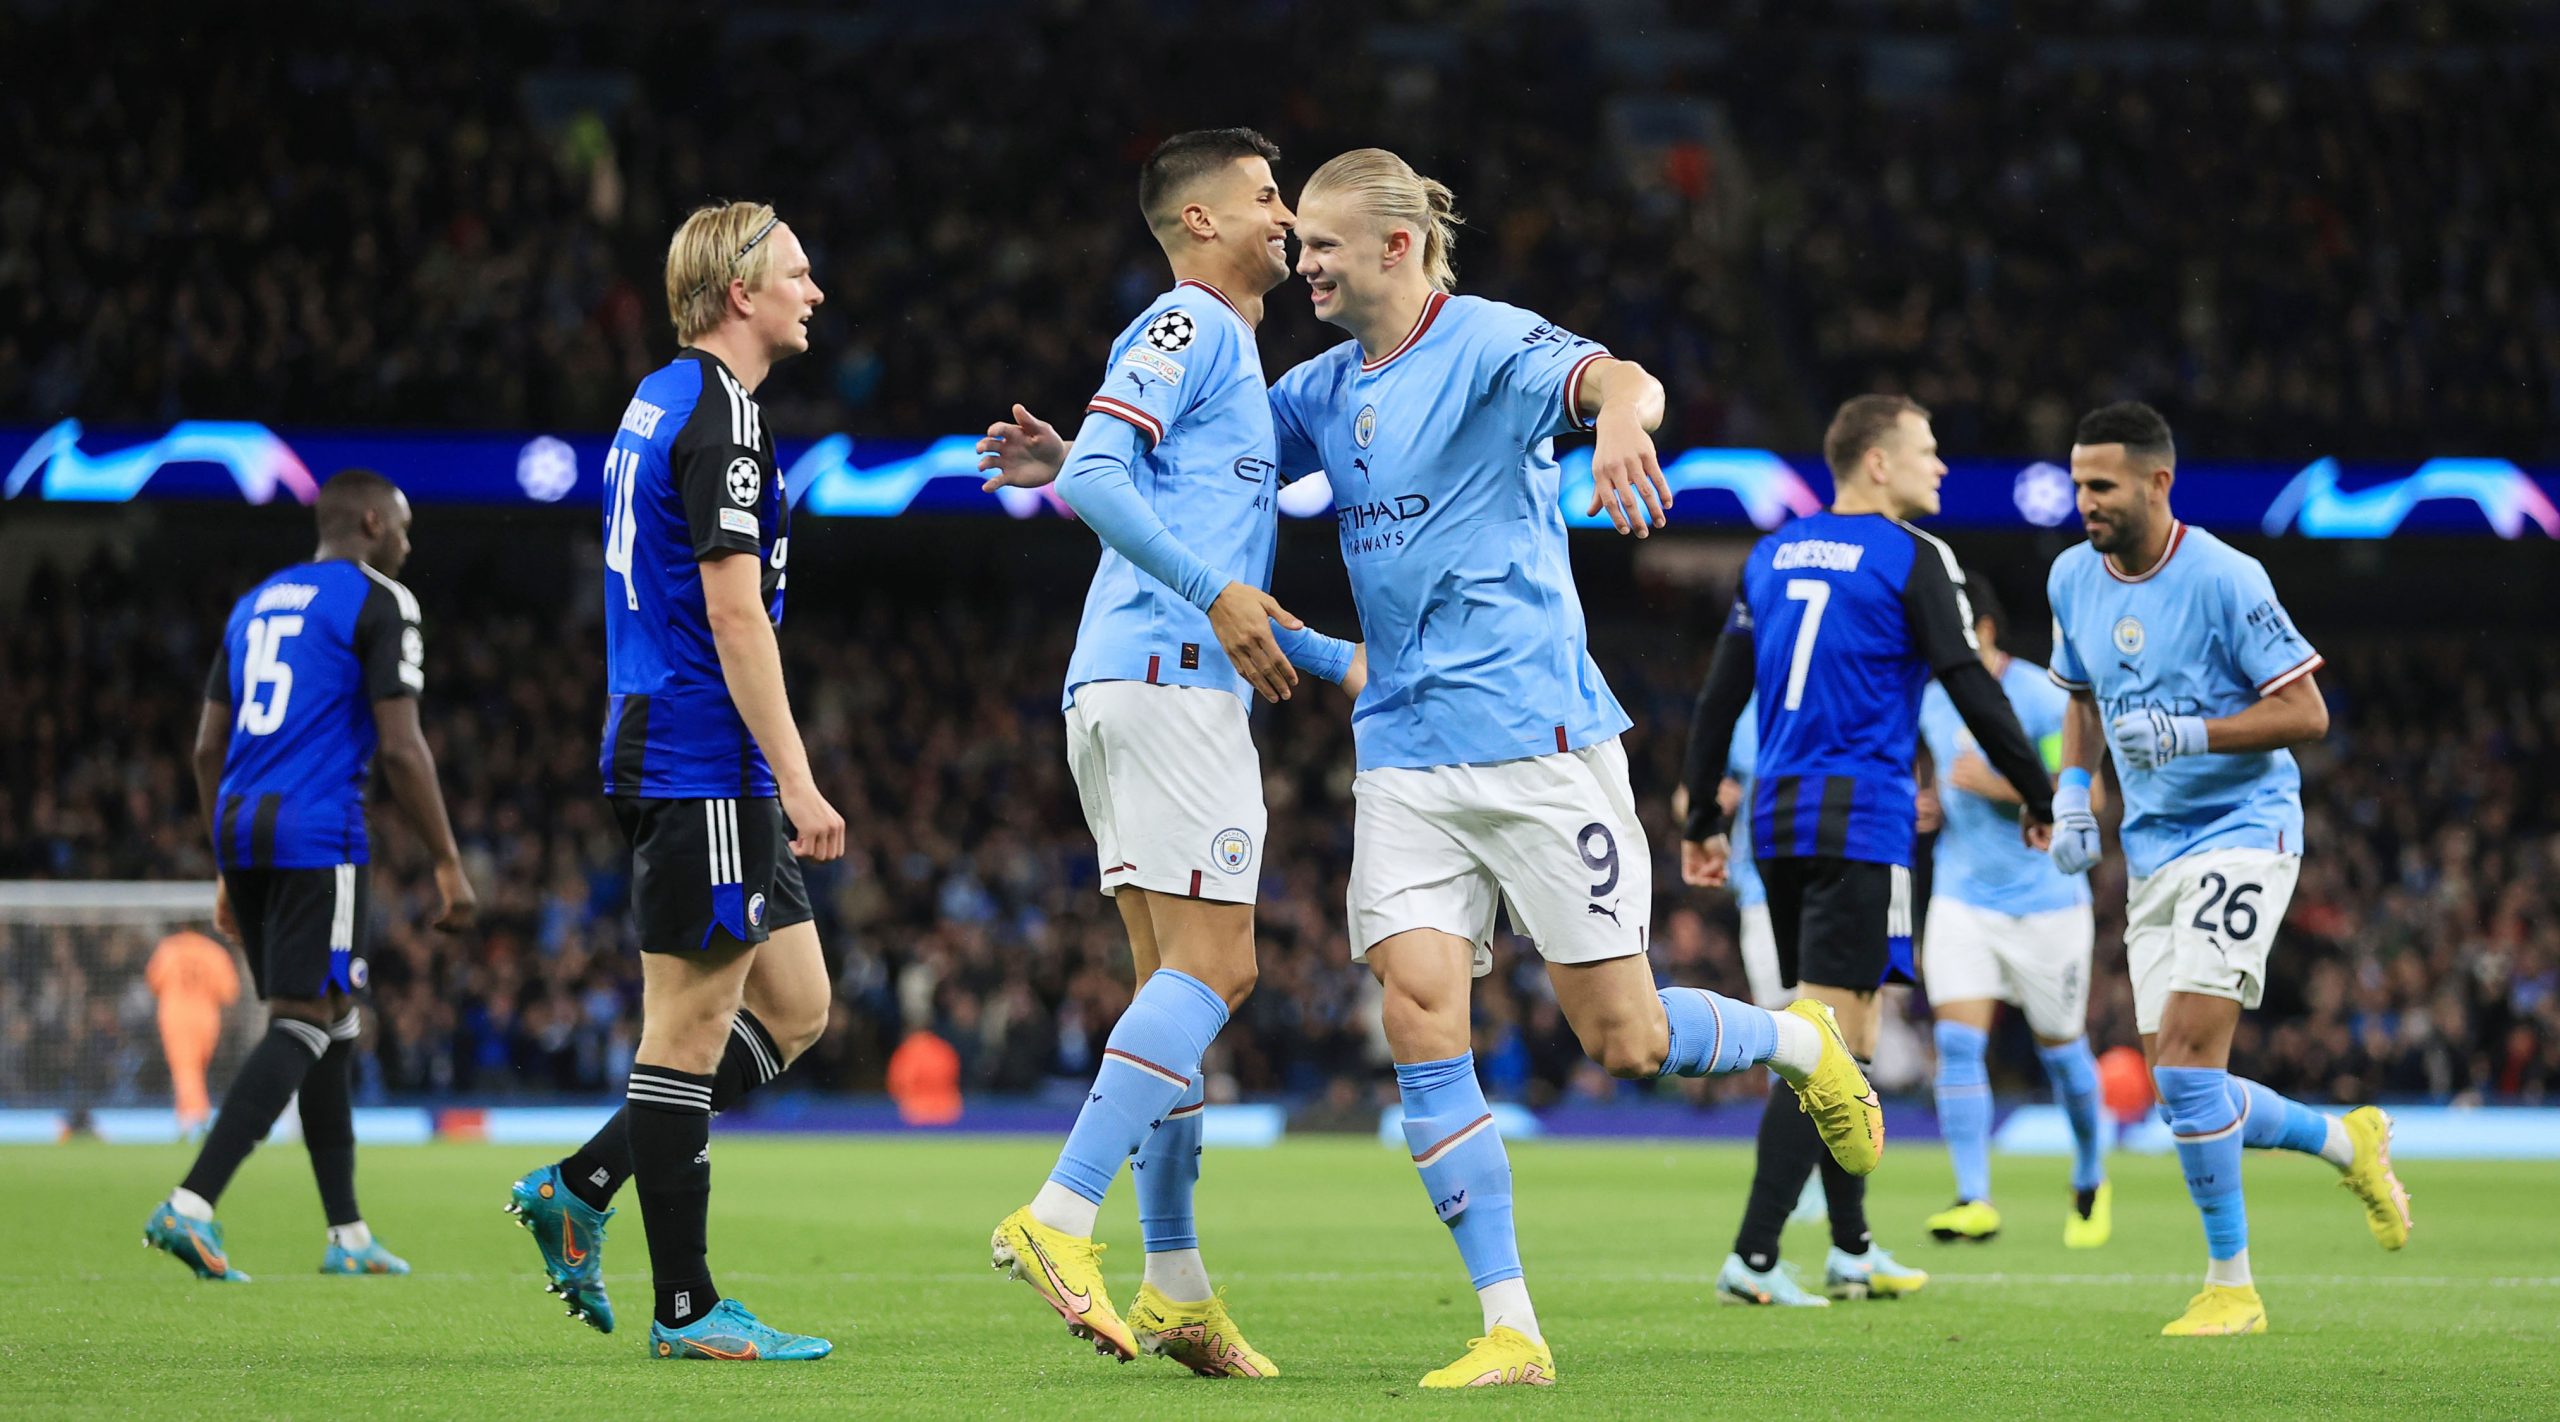 Manchester City players celebrating after the final whistle.